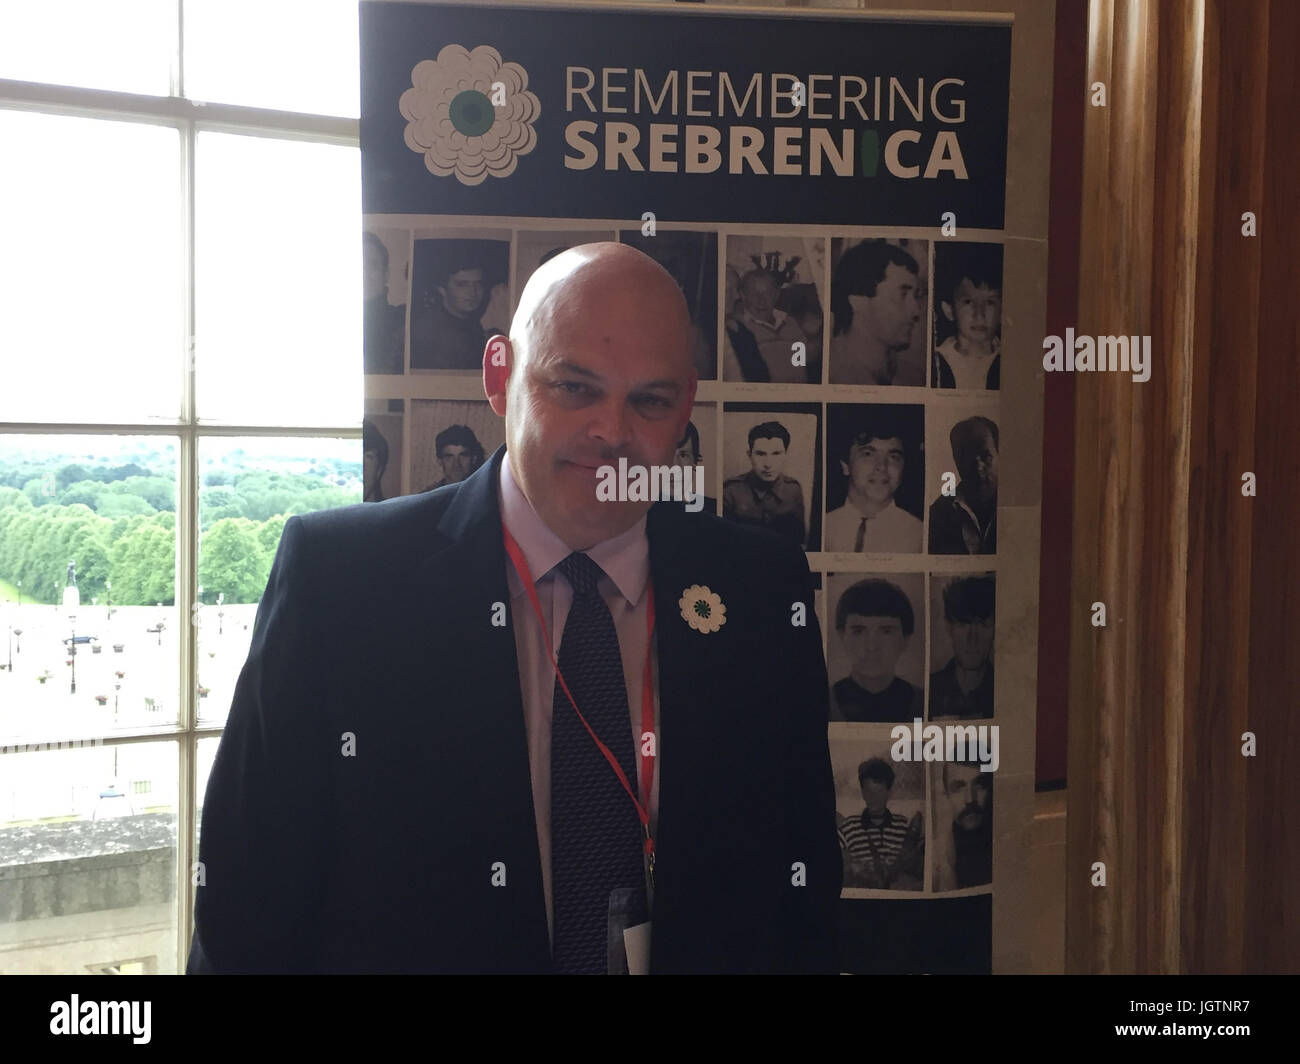 BEST QUALITY AVAILABLE Chairman of the Community Relations Council Peter Osborne at Stormont who has warned against sliding into the hatred of the past in Northern Ireland, as he commemorating 22 years since the slaughter of more than 8,000 Muslim men and boys by Bosnian Serb forces in the Balkan town of Srebrenica. Stock Photo